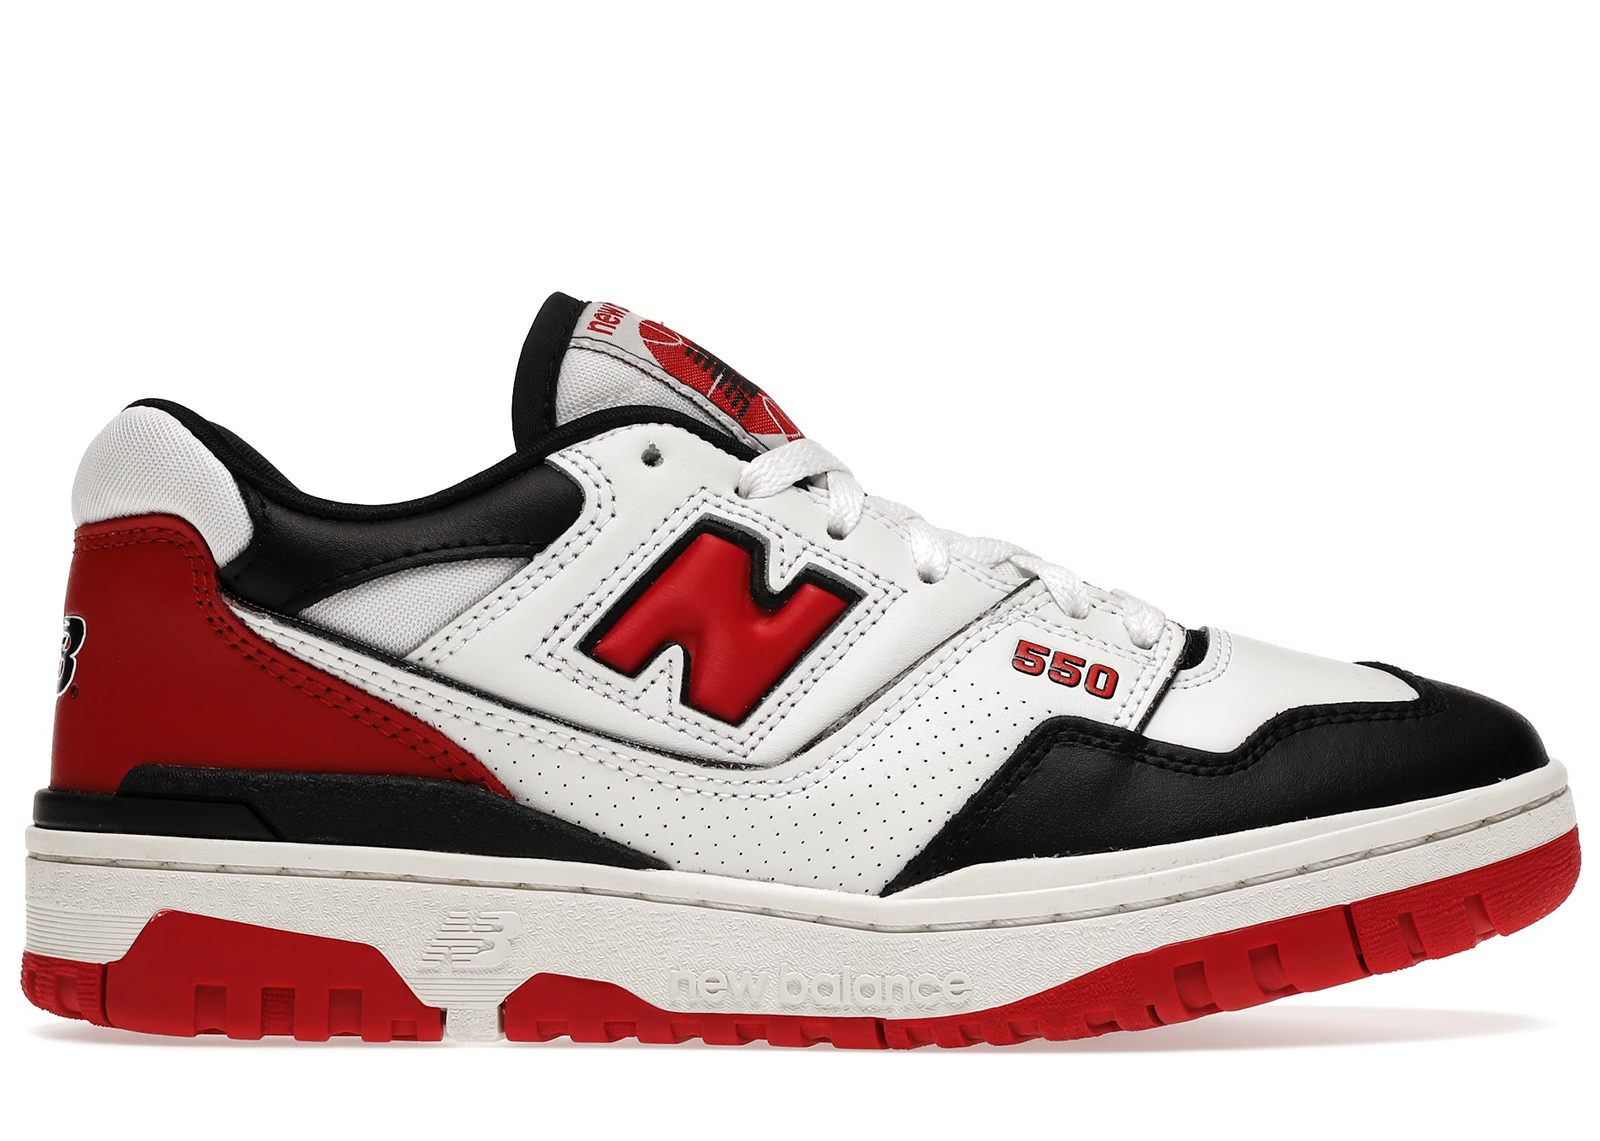 Buy New Balance Shoes & Deadstock Sneakers دراي فود